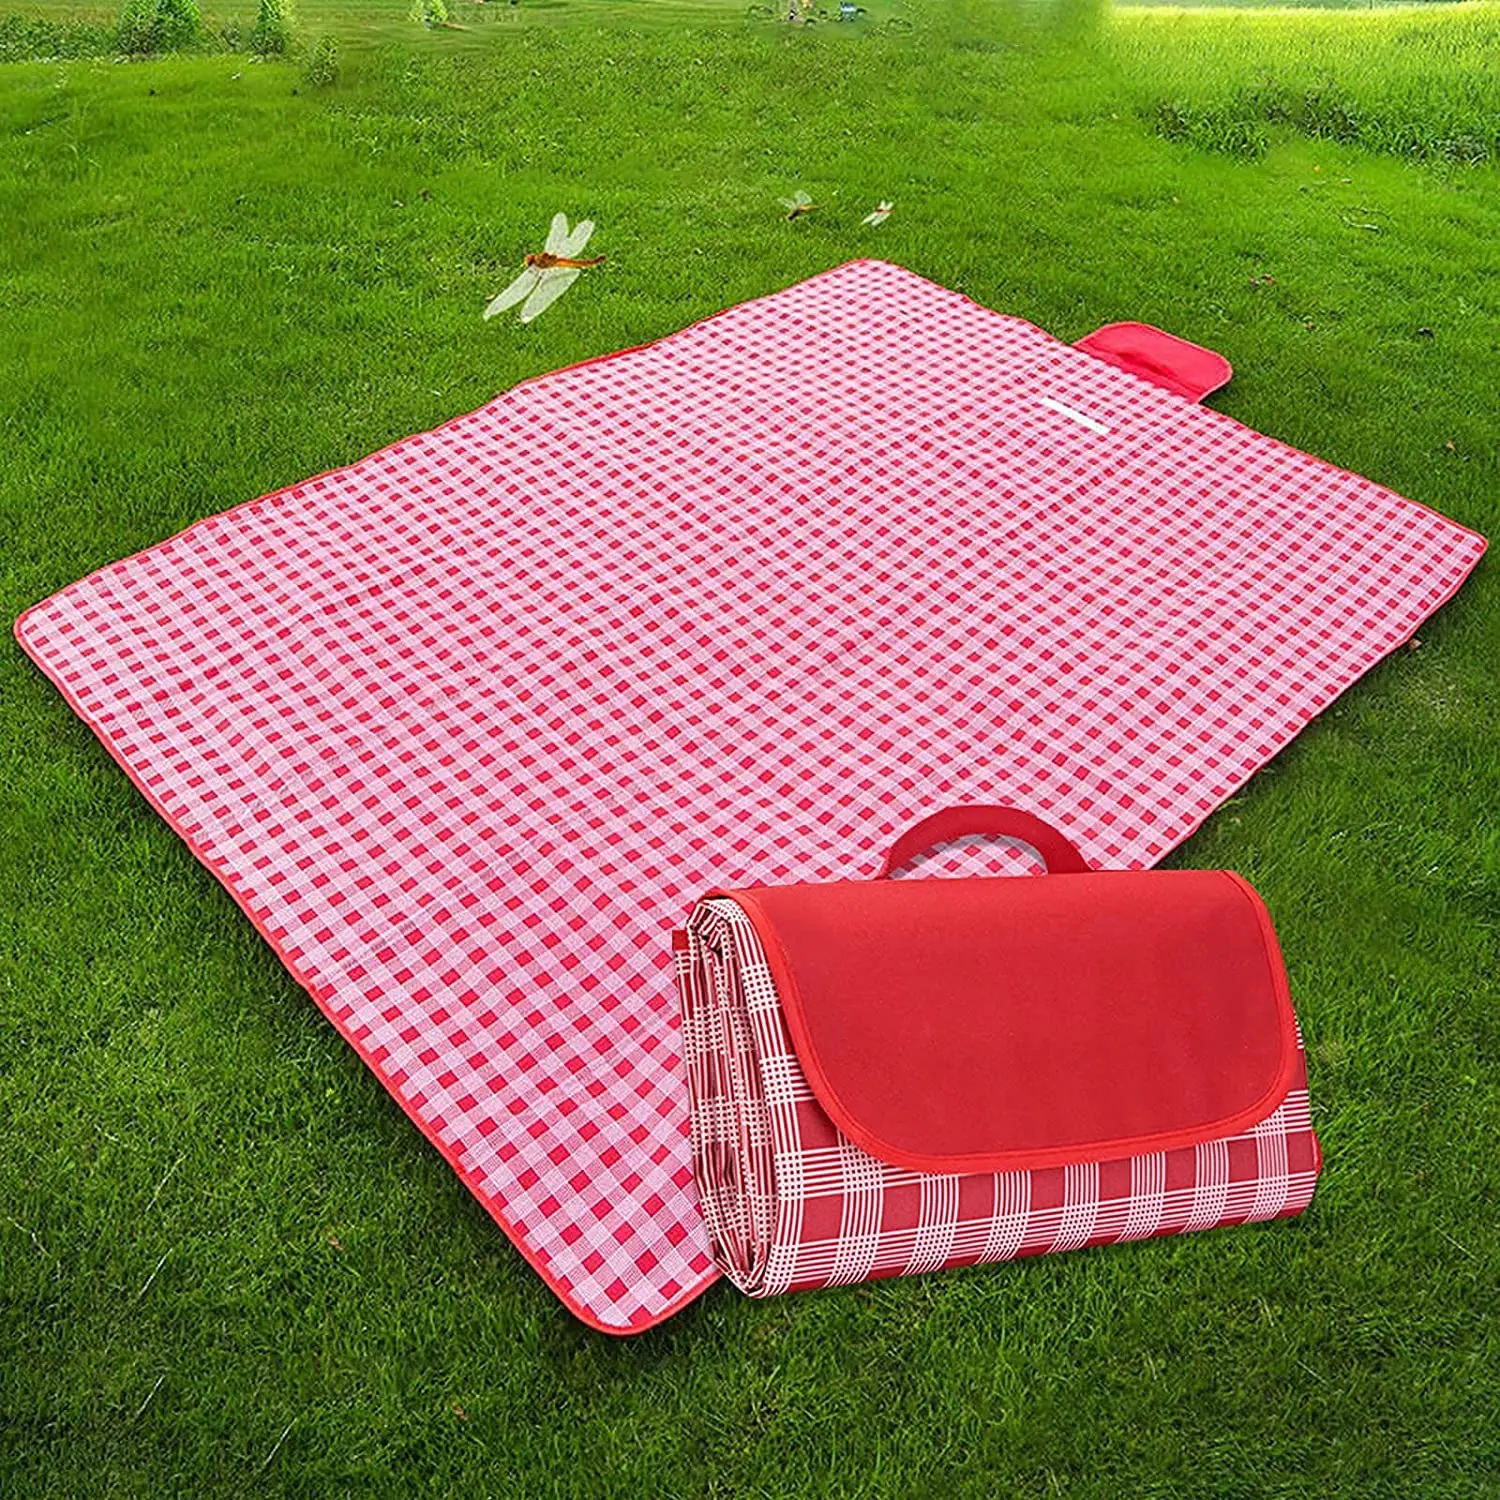 

Large Outdoor Blanket Picnic Mat Portable Picnic Blankets Waterproof Foldable Sandproof Beach Mat, Yellow,red,customized